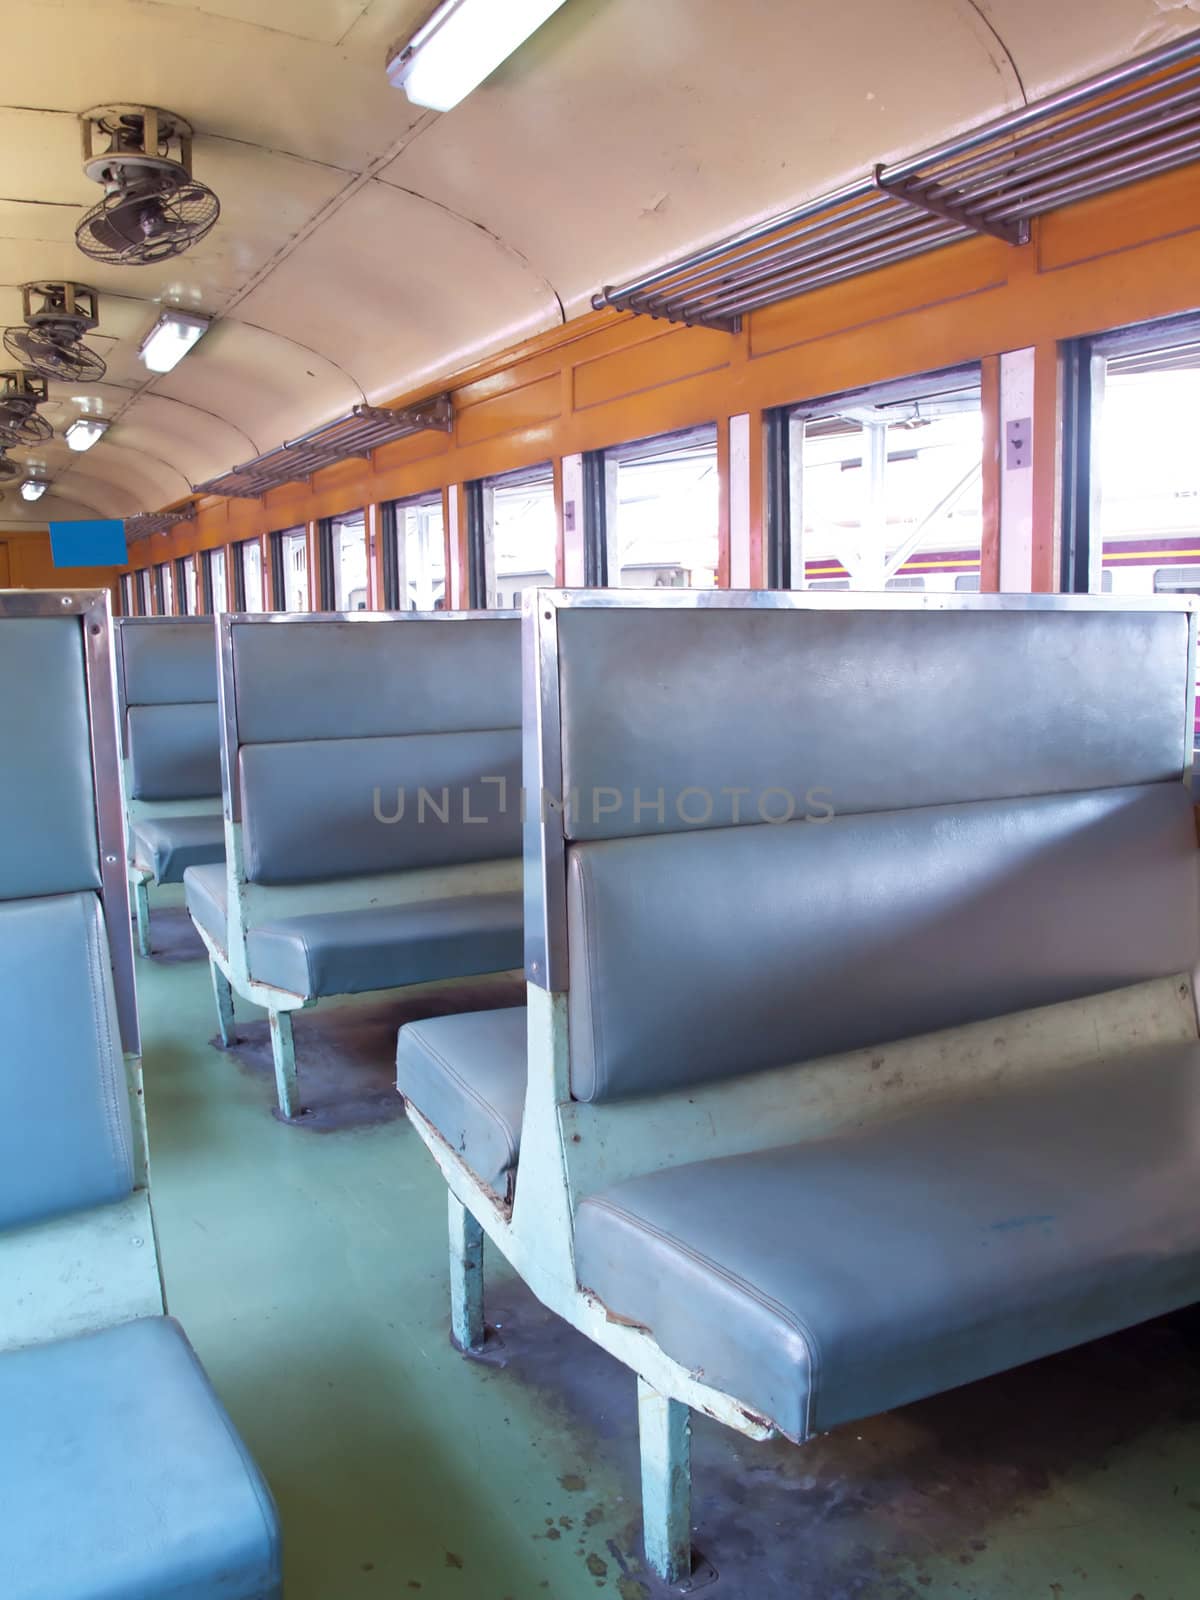 Inside of a vintage train passenger carriage in Thailand